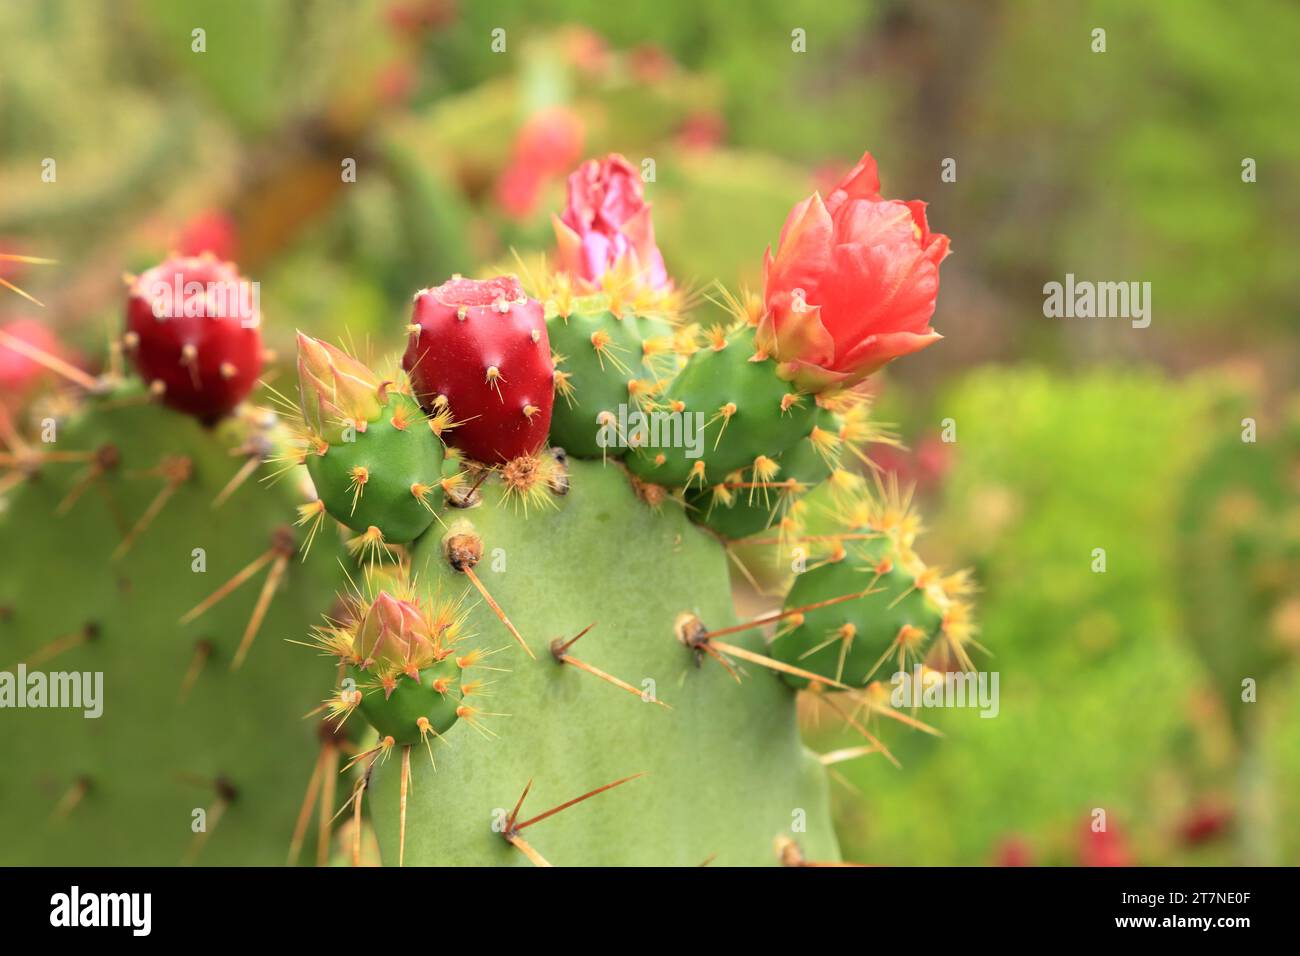 Opuntia ficus-indica cactus with tunas fruits and flowers Stock Photo